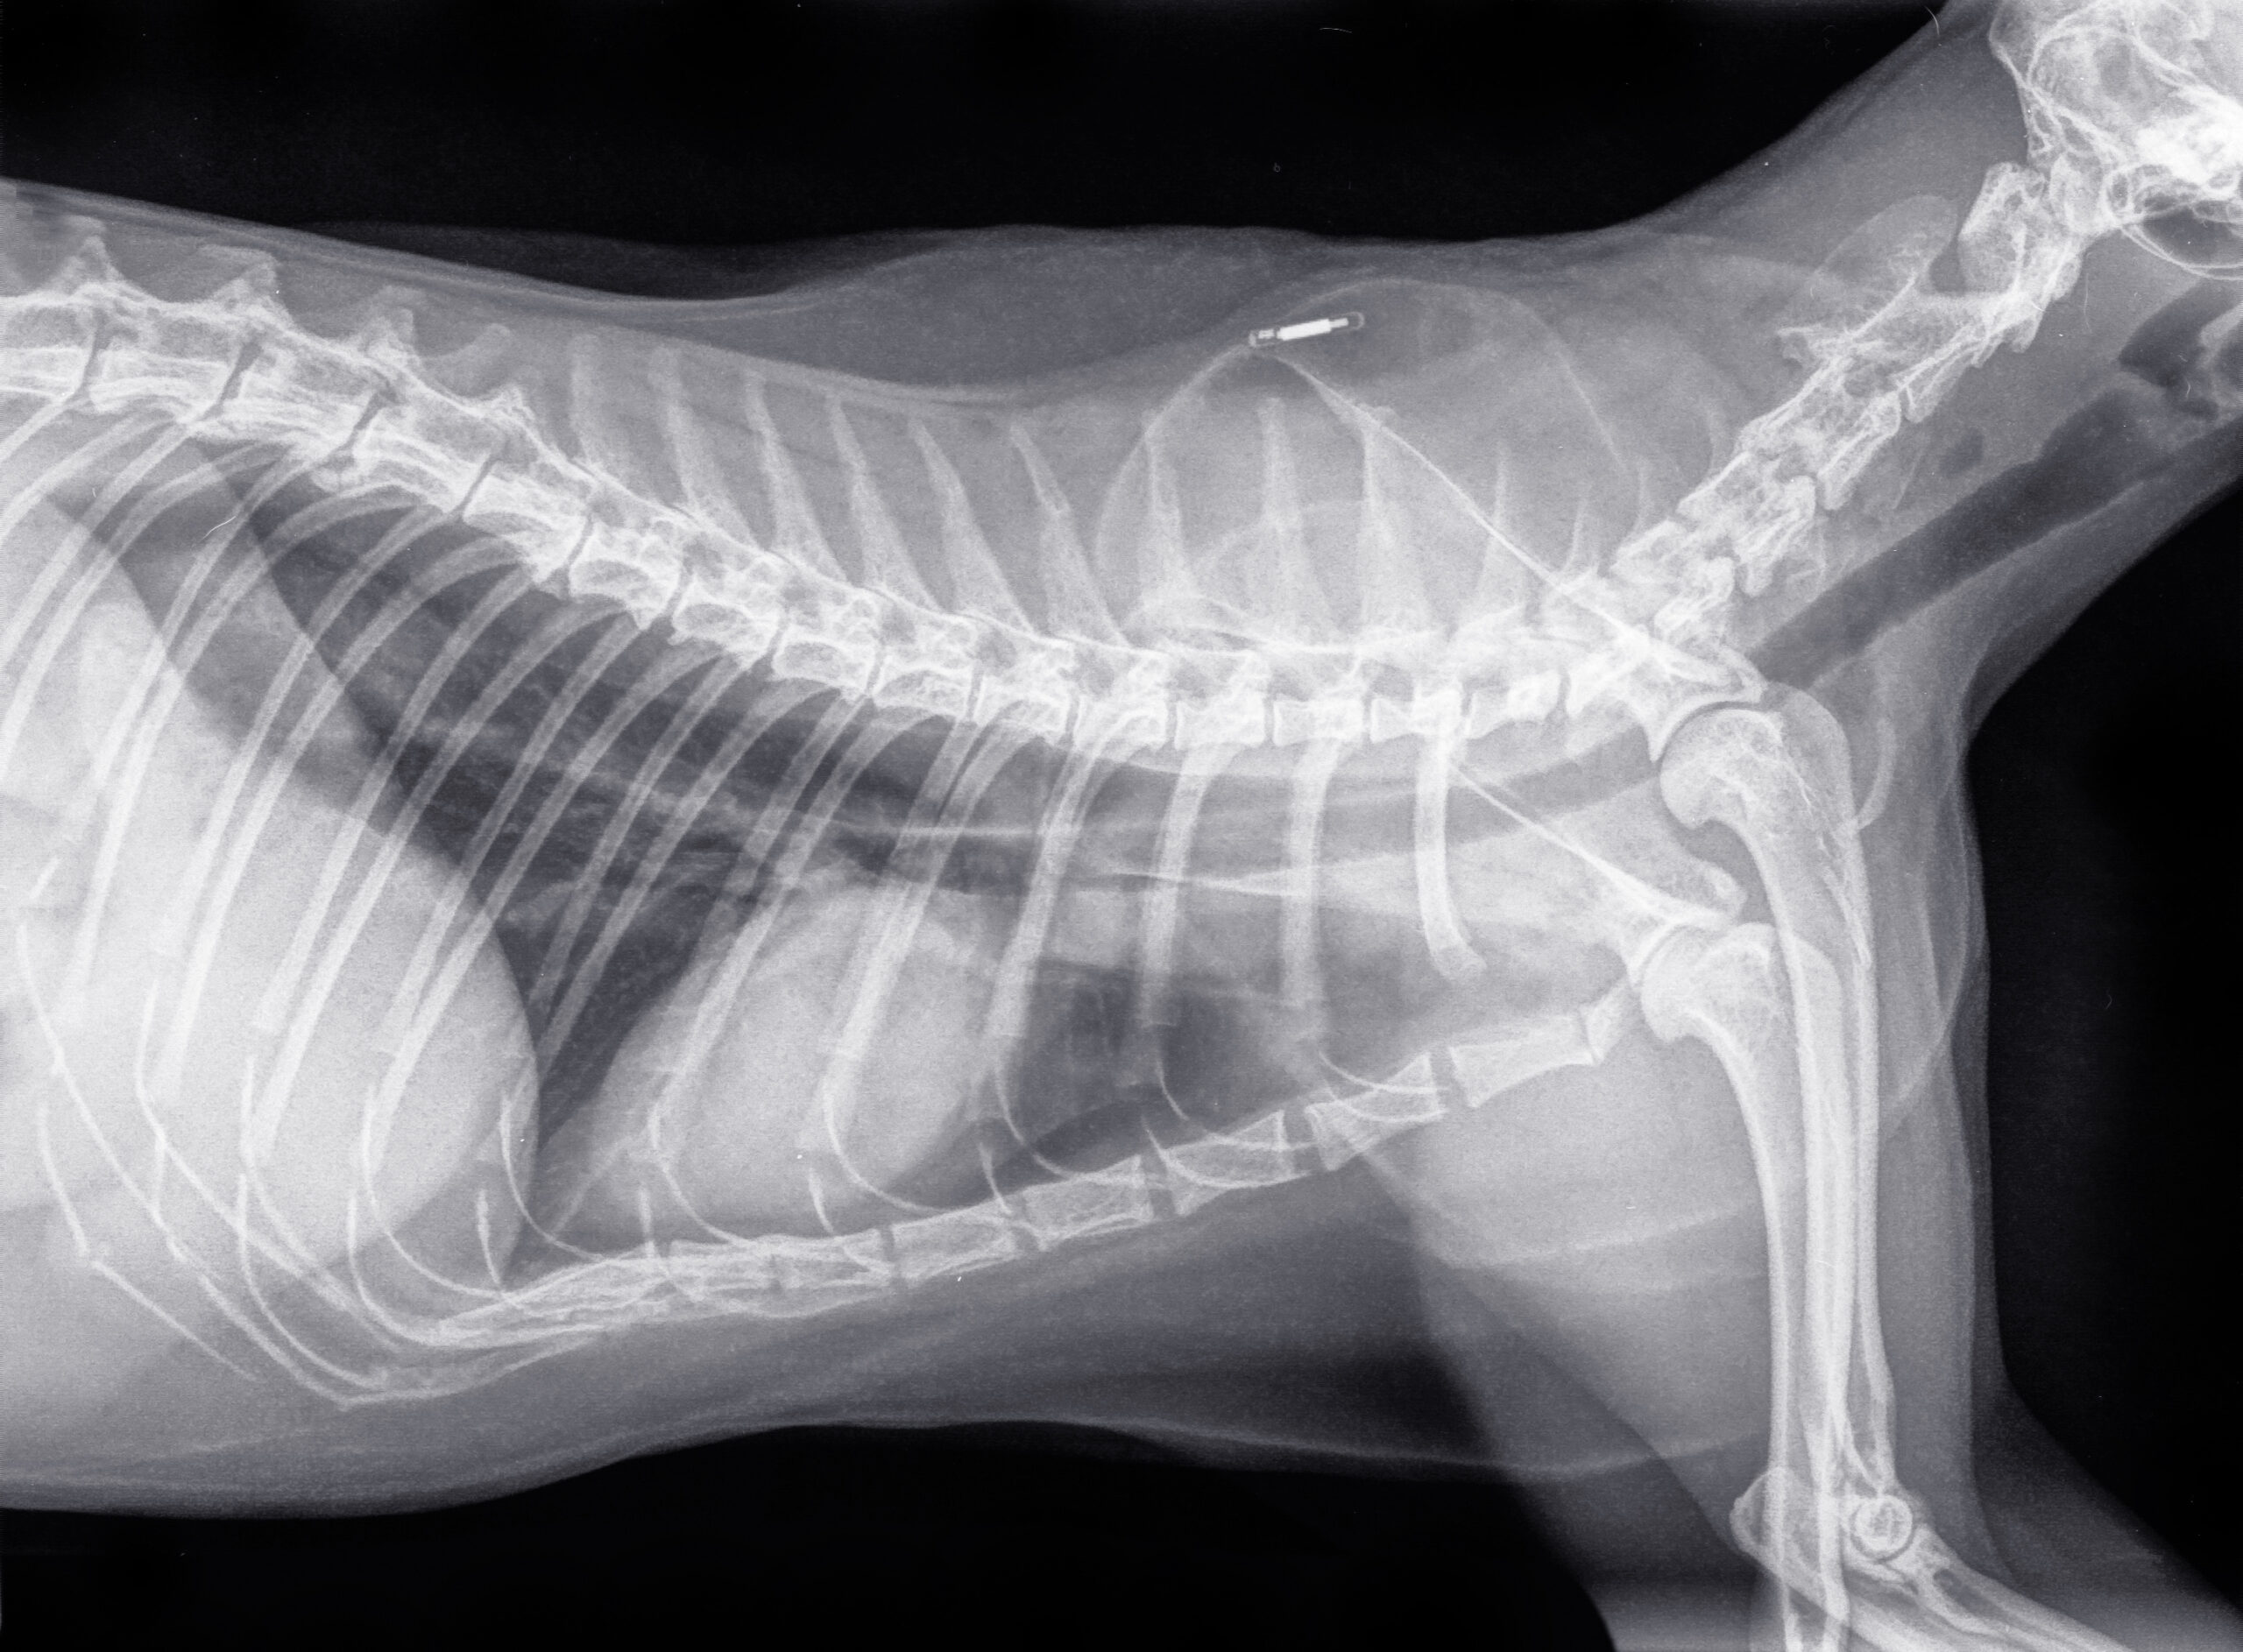 Digital x-ray of a side view of the thorax of a cat. The lungs,